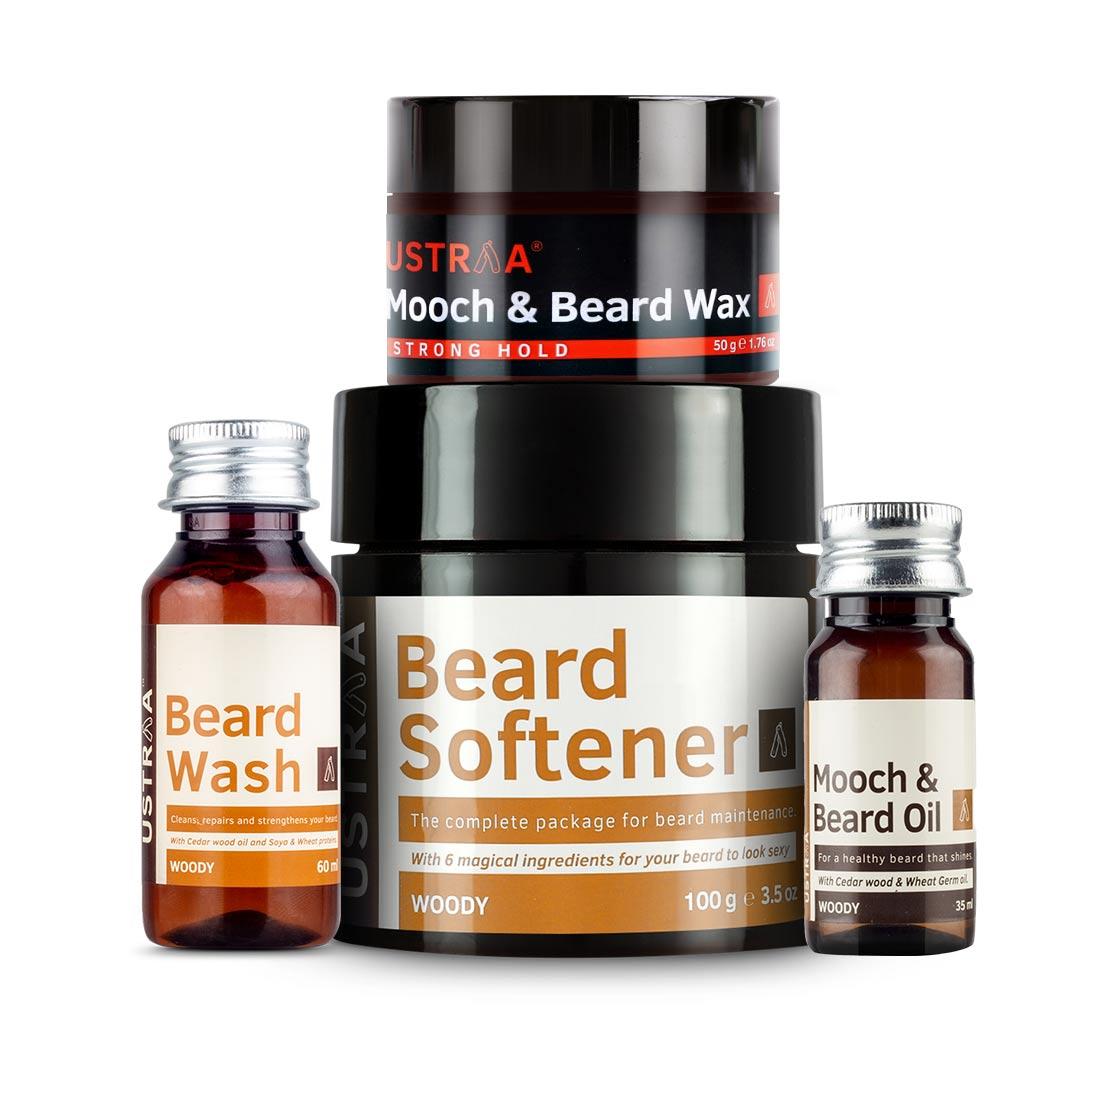 The Great Beard Pack